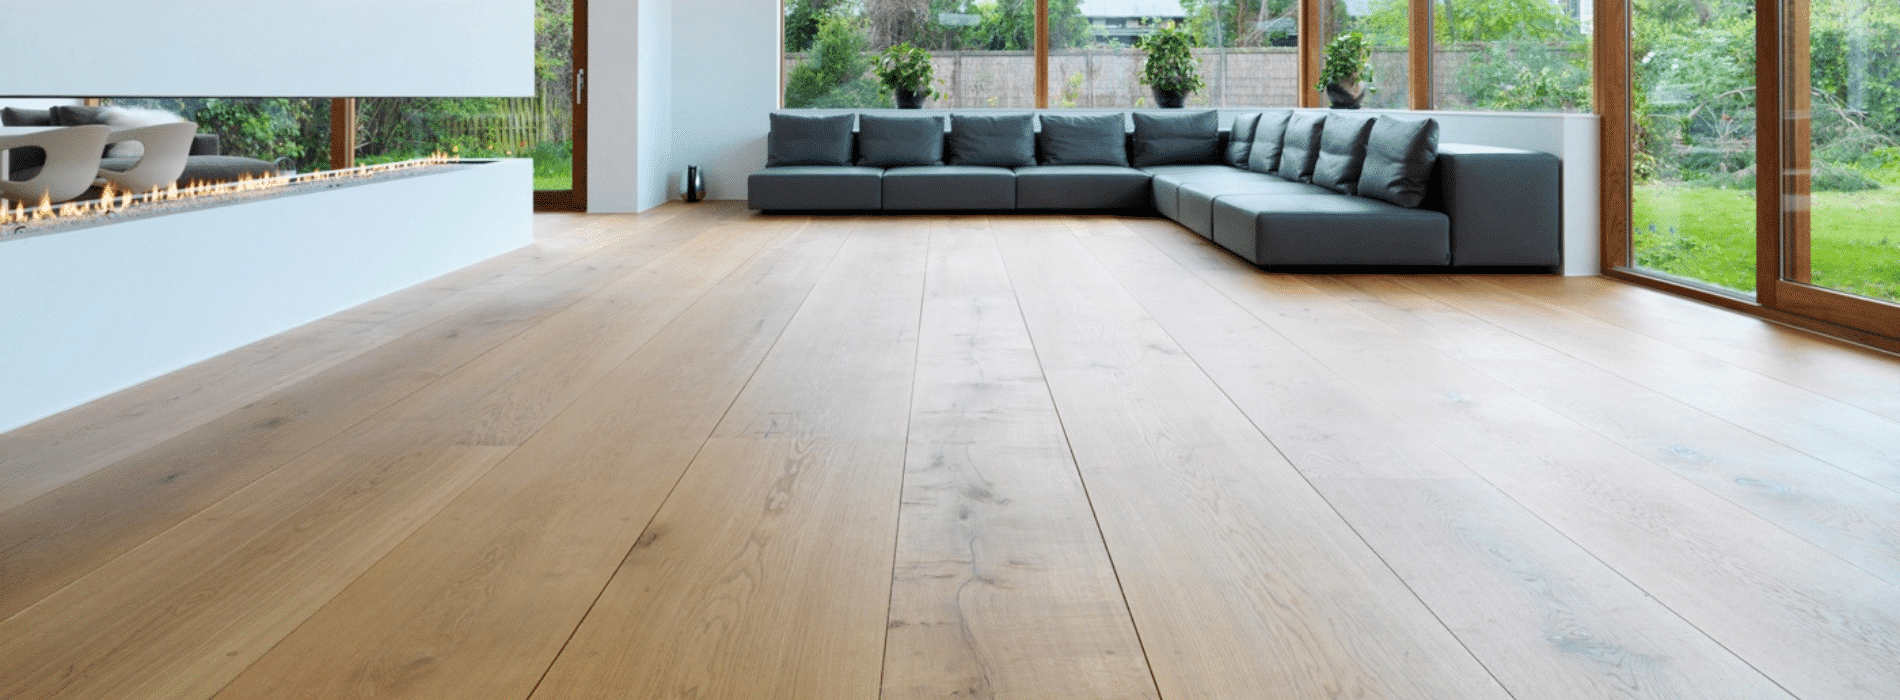 Expertly restored 5-year-old hardwood floor in Blackheath, SE3. Mr Sander® used Bona 2K Frost whitewashing and Traffic HD 15% sheen matte lacquer. Durable and stunning, this finish guarantees long-lasting beauty. 